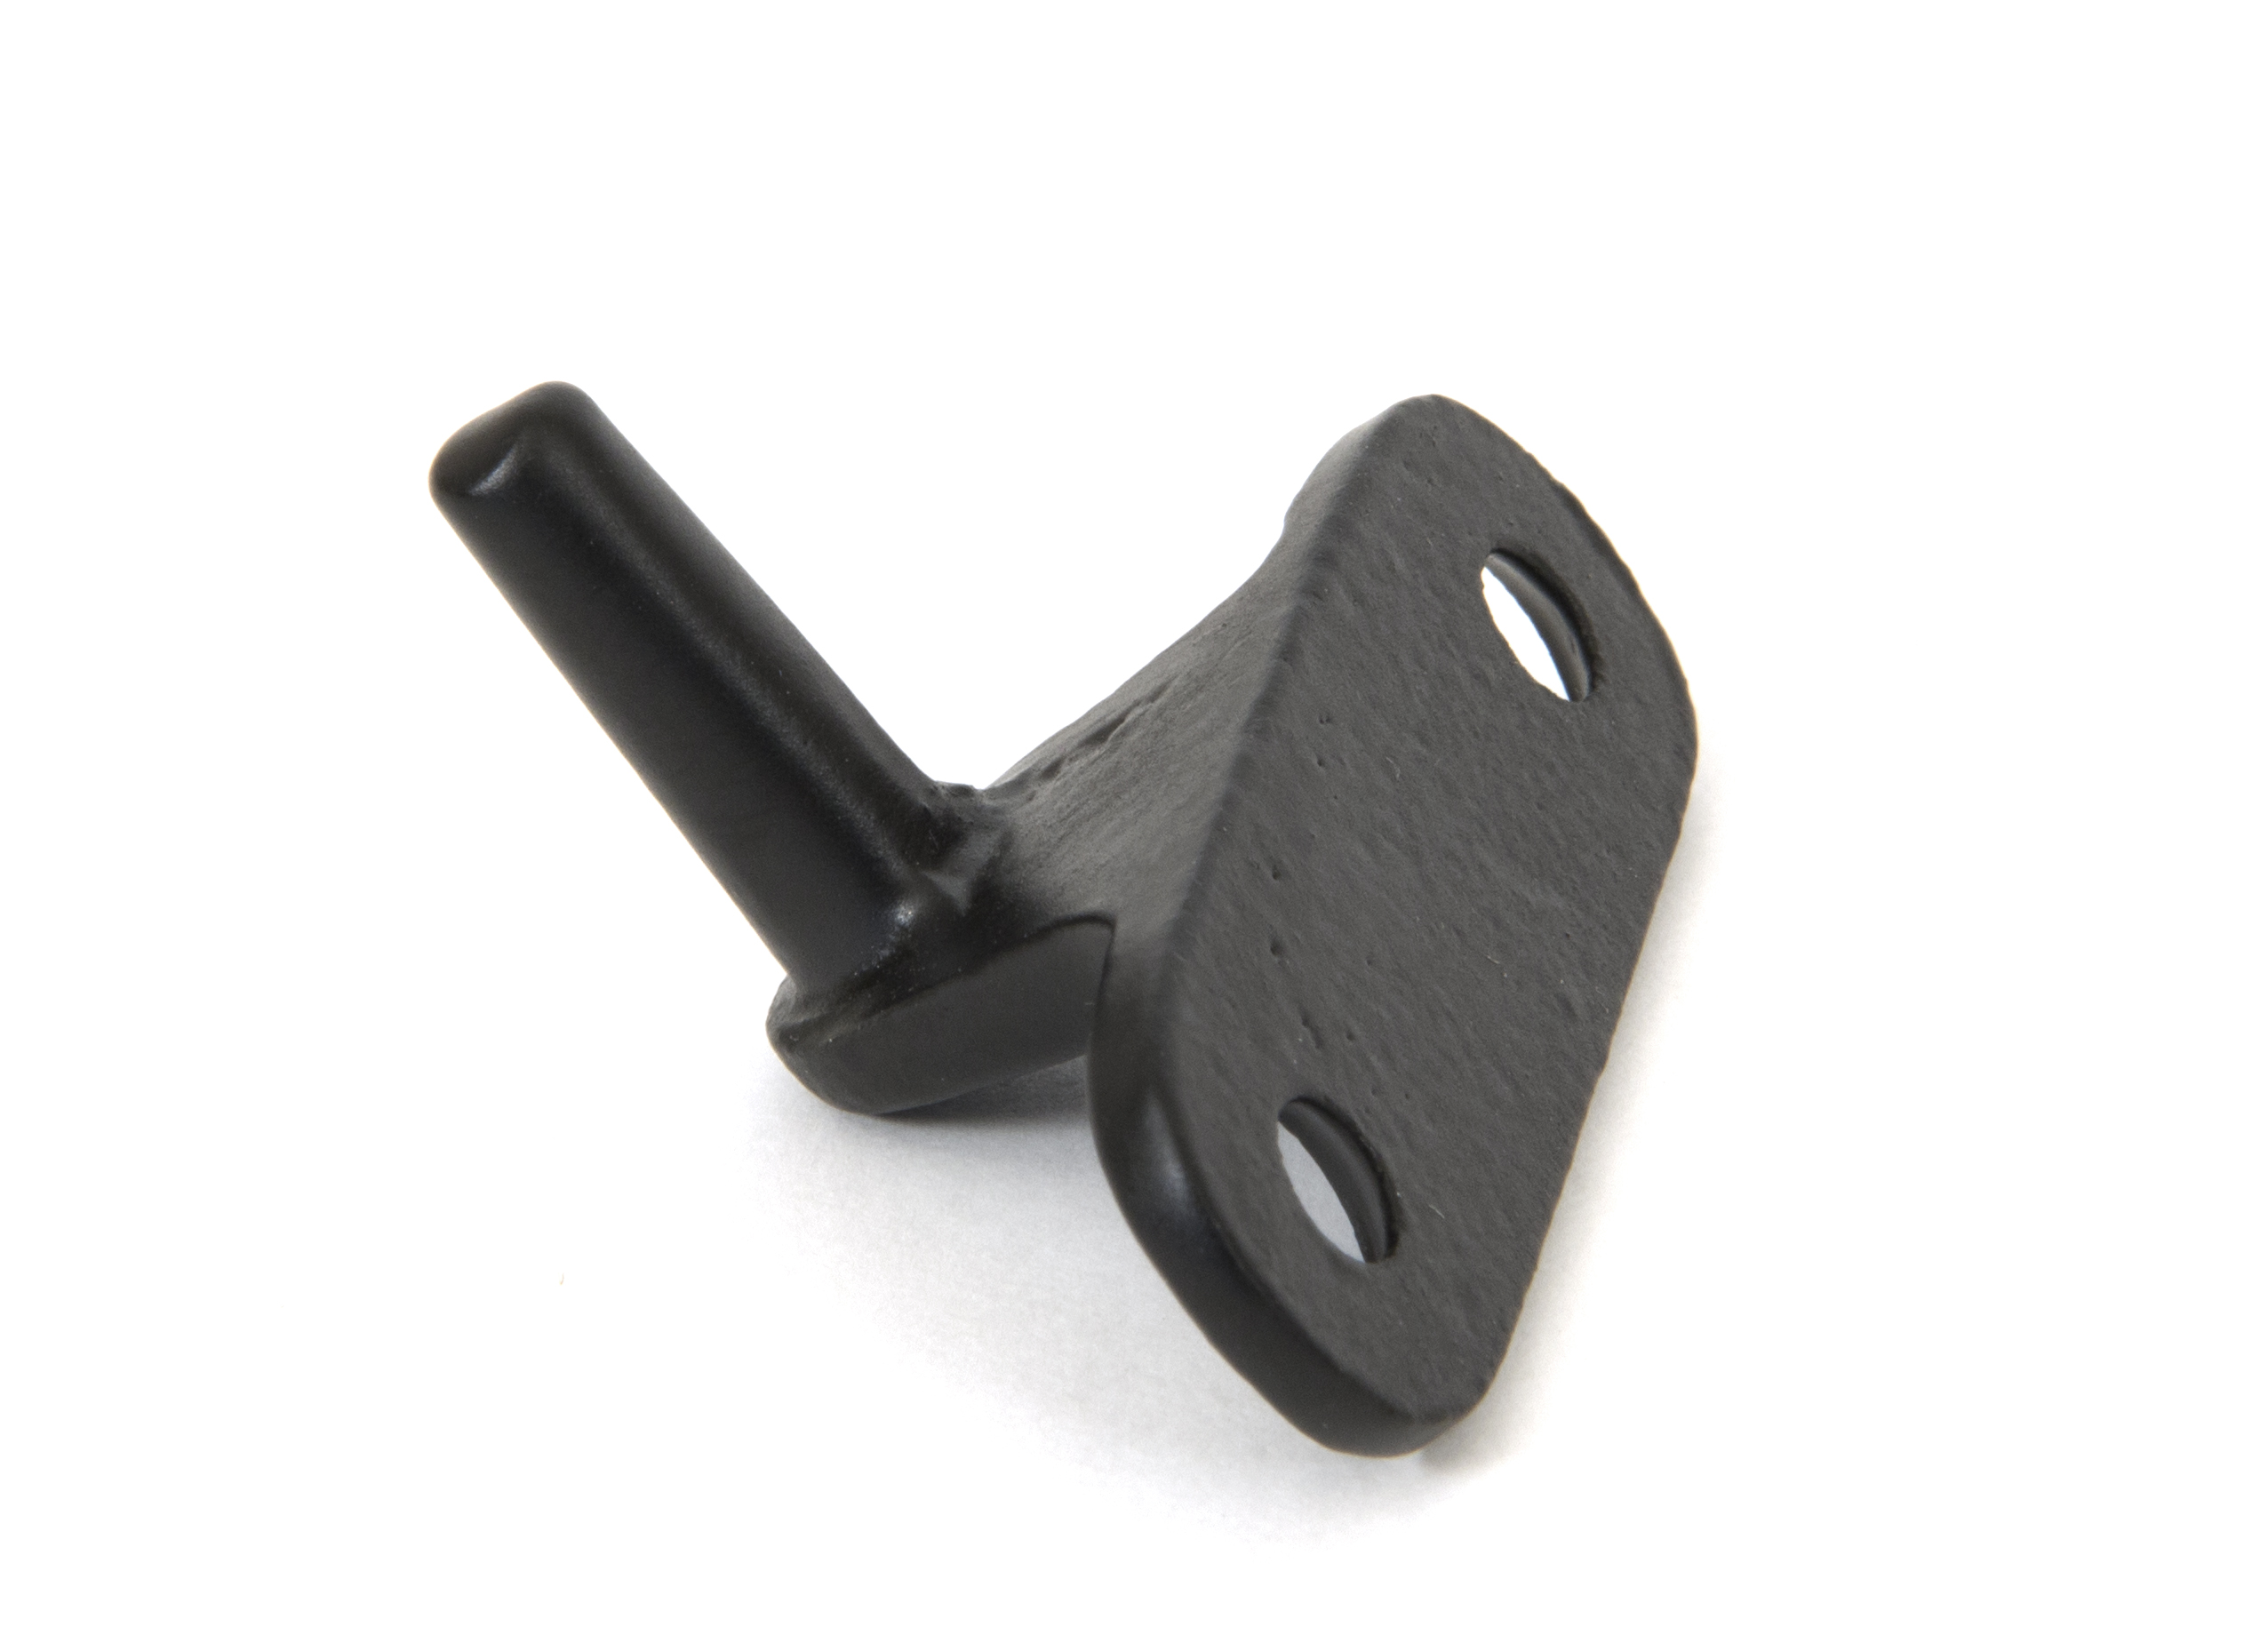 Cranked Casement Stay Pin